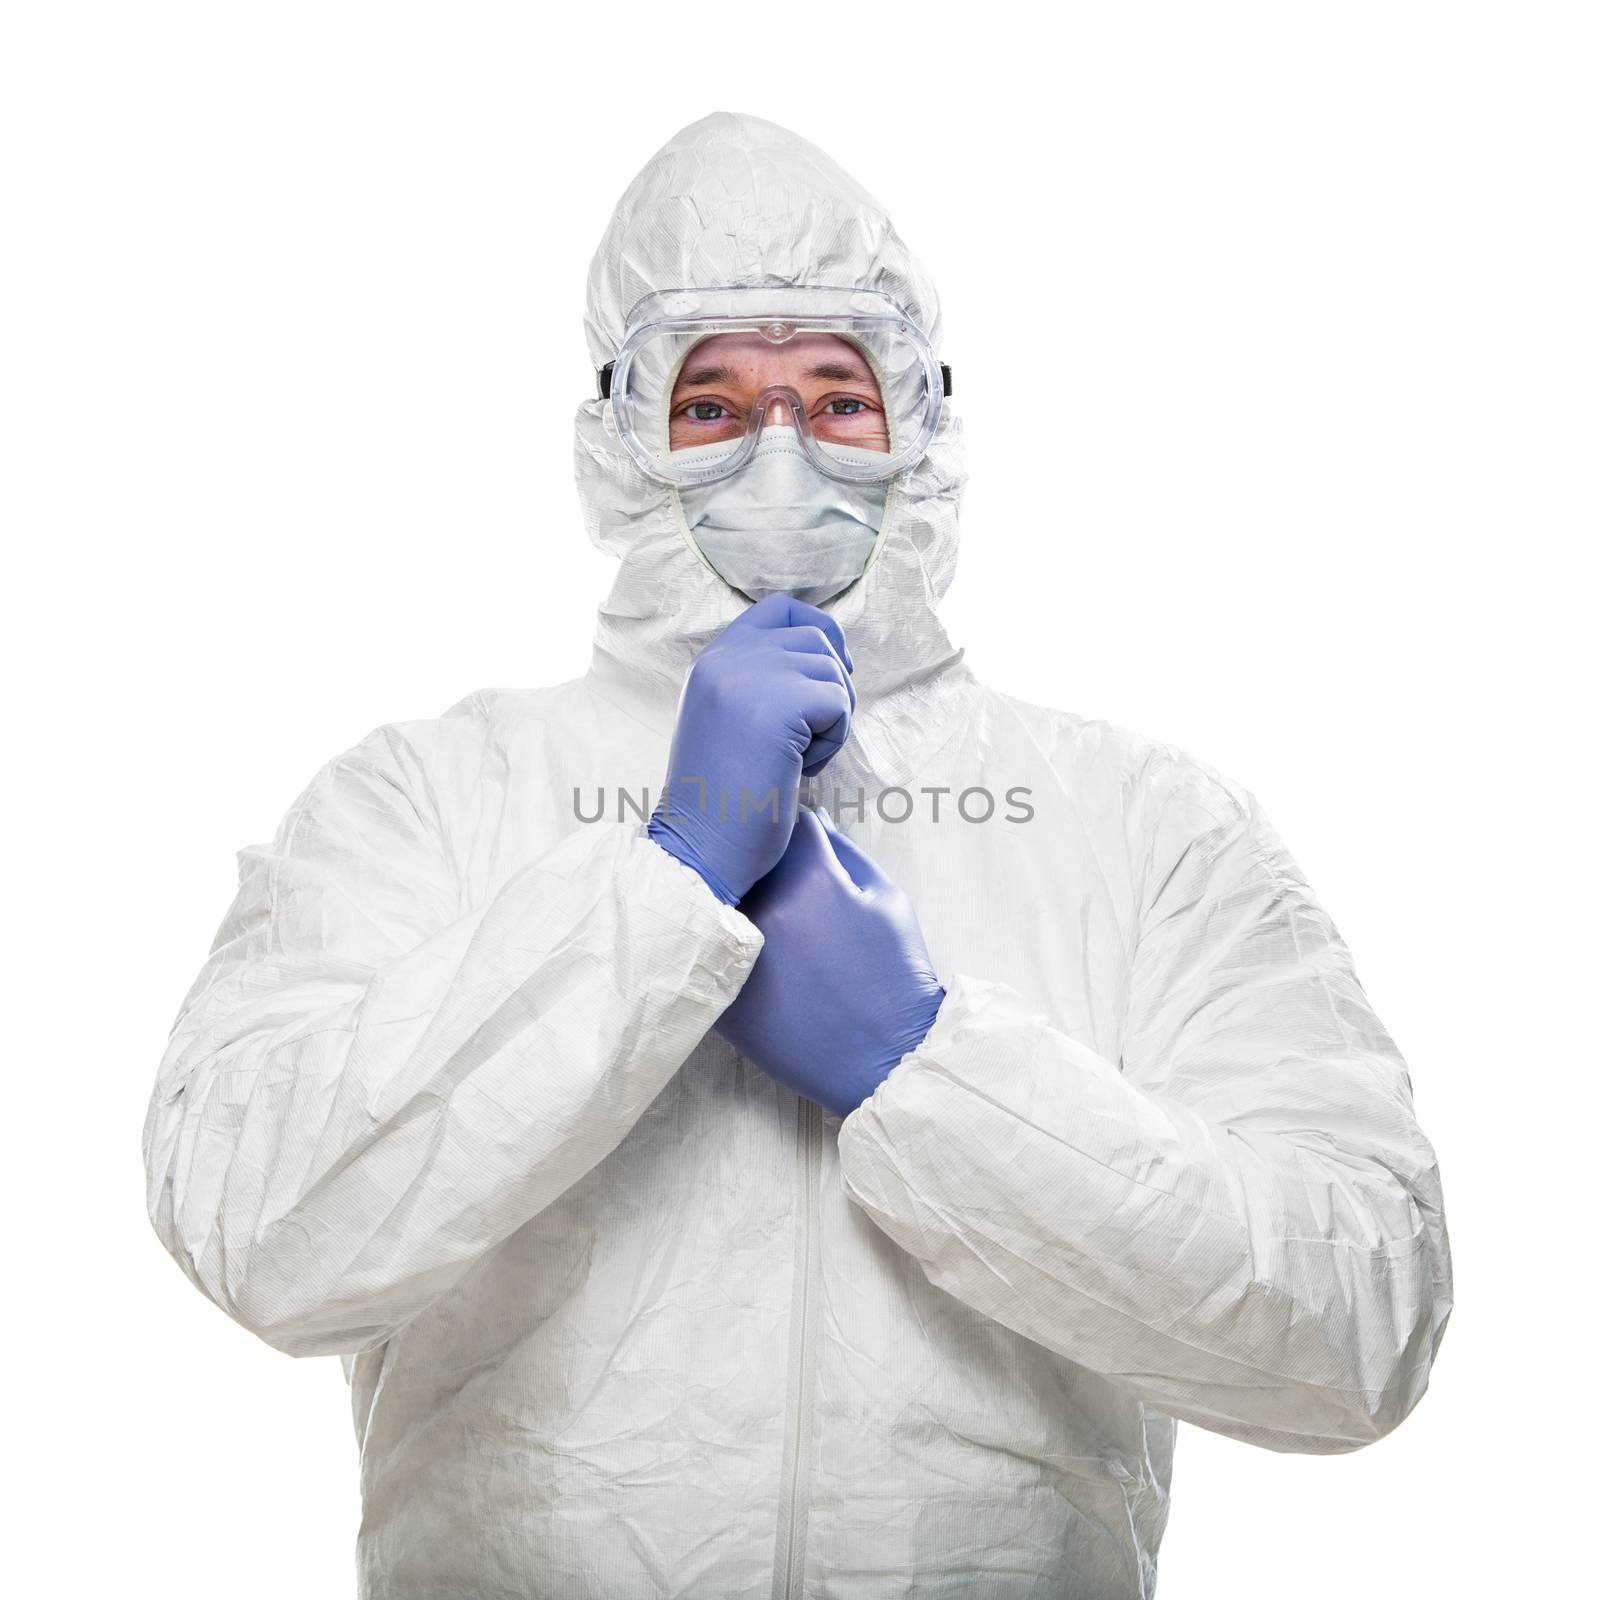 Man Wearing Hazmat Suit, Goggles and Medical Face Mask Isolated On White. by Feverpitched